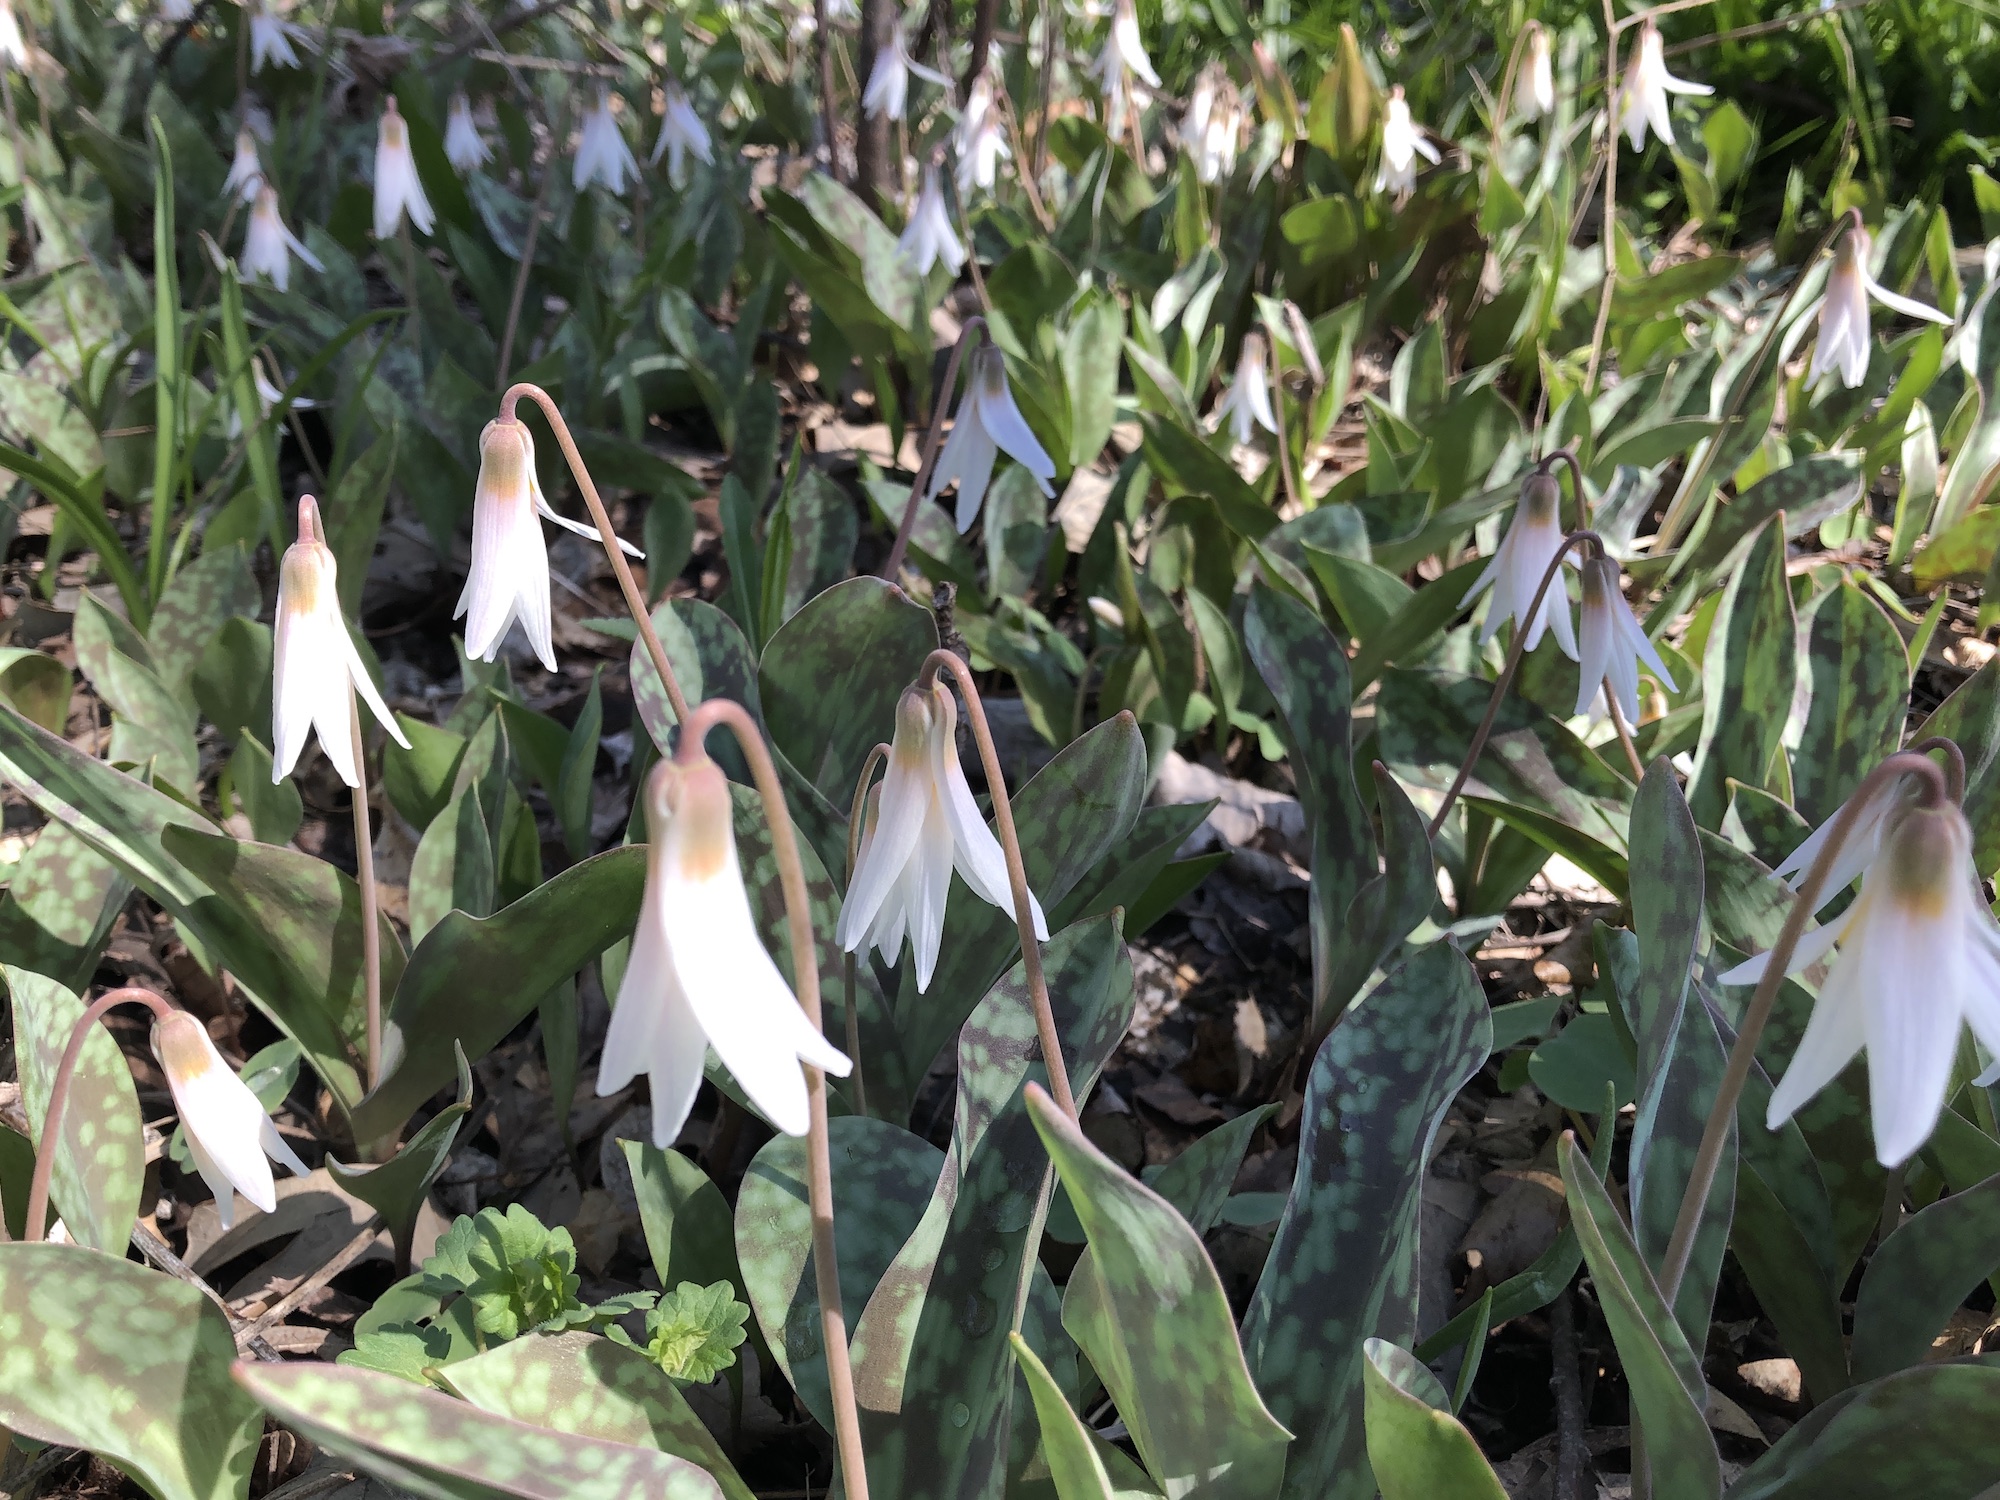 White Trout Lilies on April 26, 2019 near Council Ring.